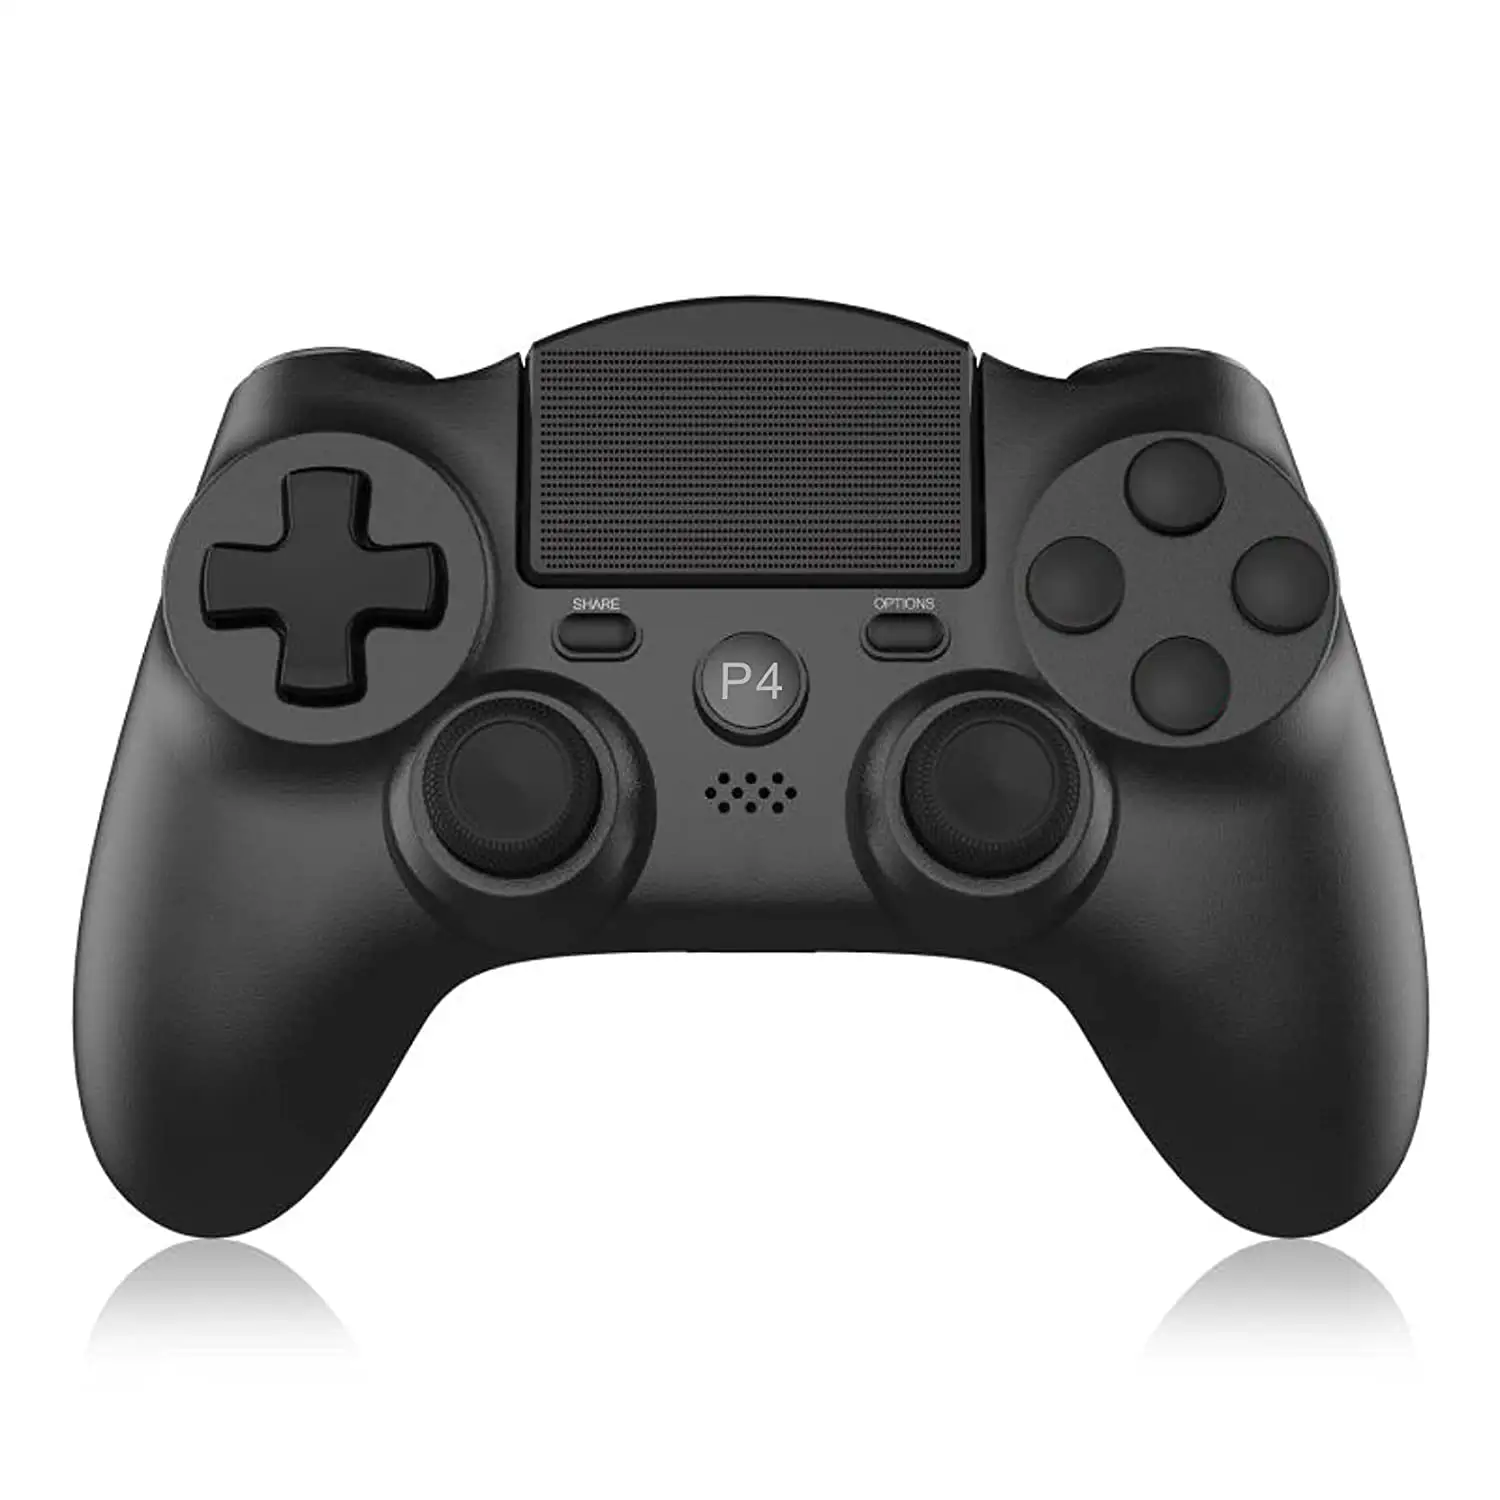 Amazone hot selling PS4 Wireless Controller BT Joystick Game controller Gamepad for PS 4 Pro 3 Slim PC